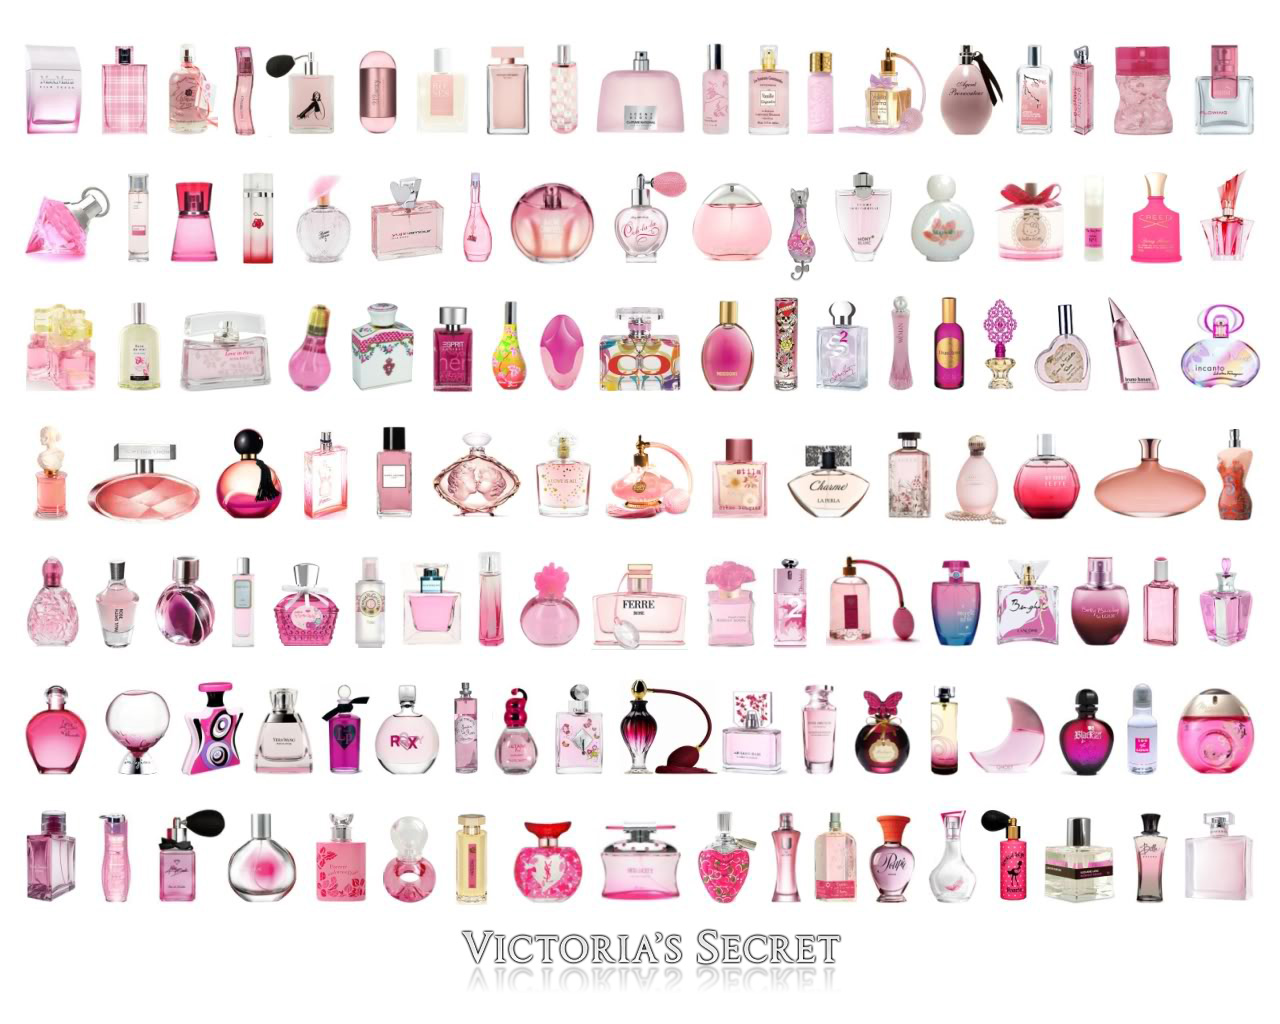 Victorias Secret images VS Pink HD wallpaper and background photos 1280x1024